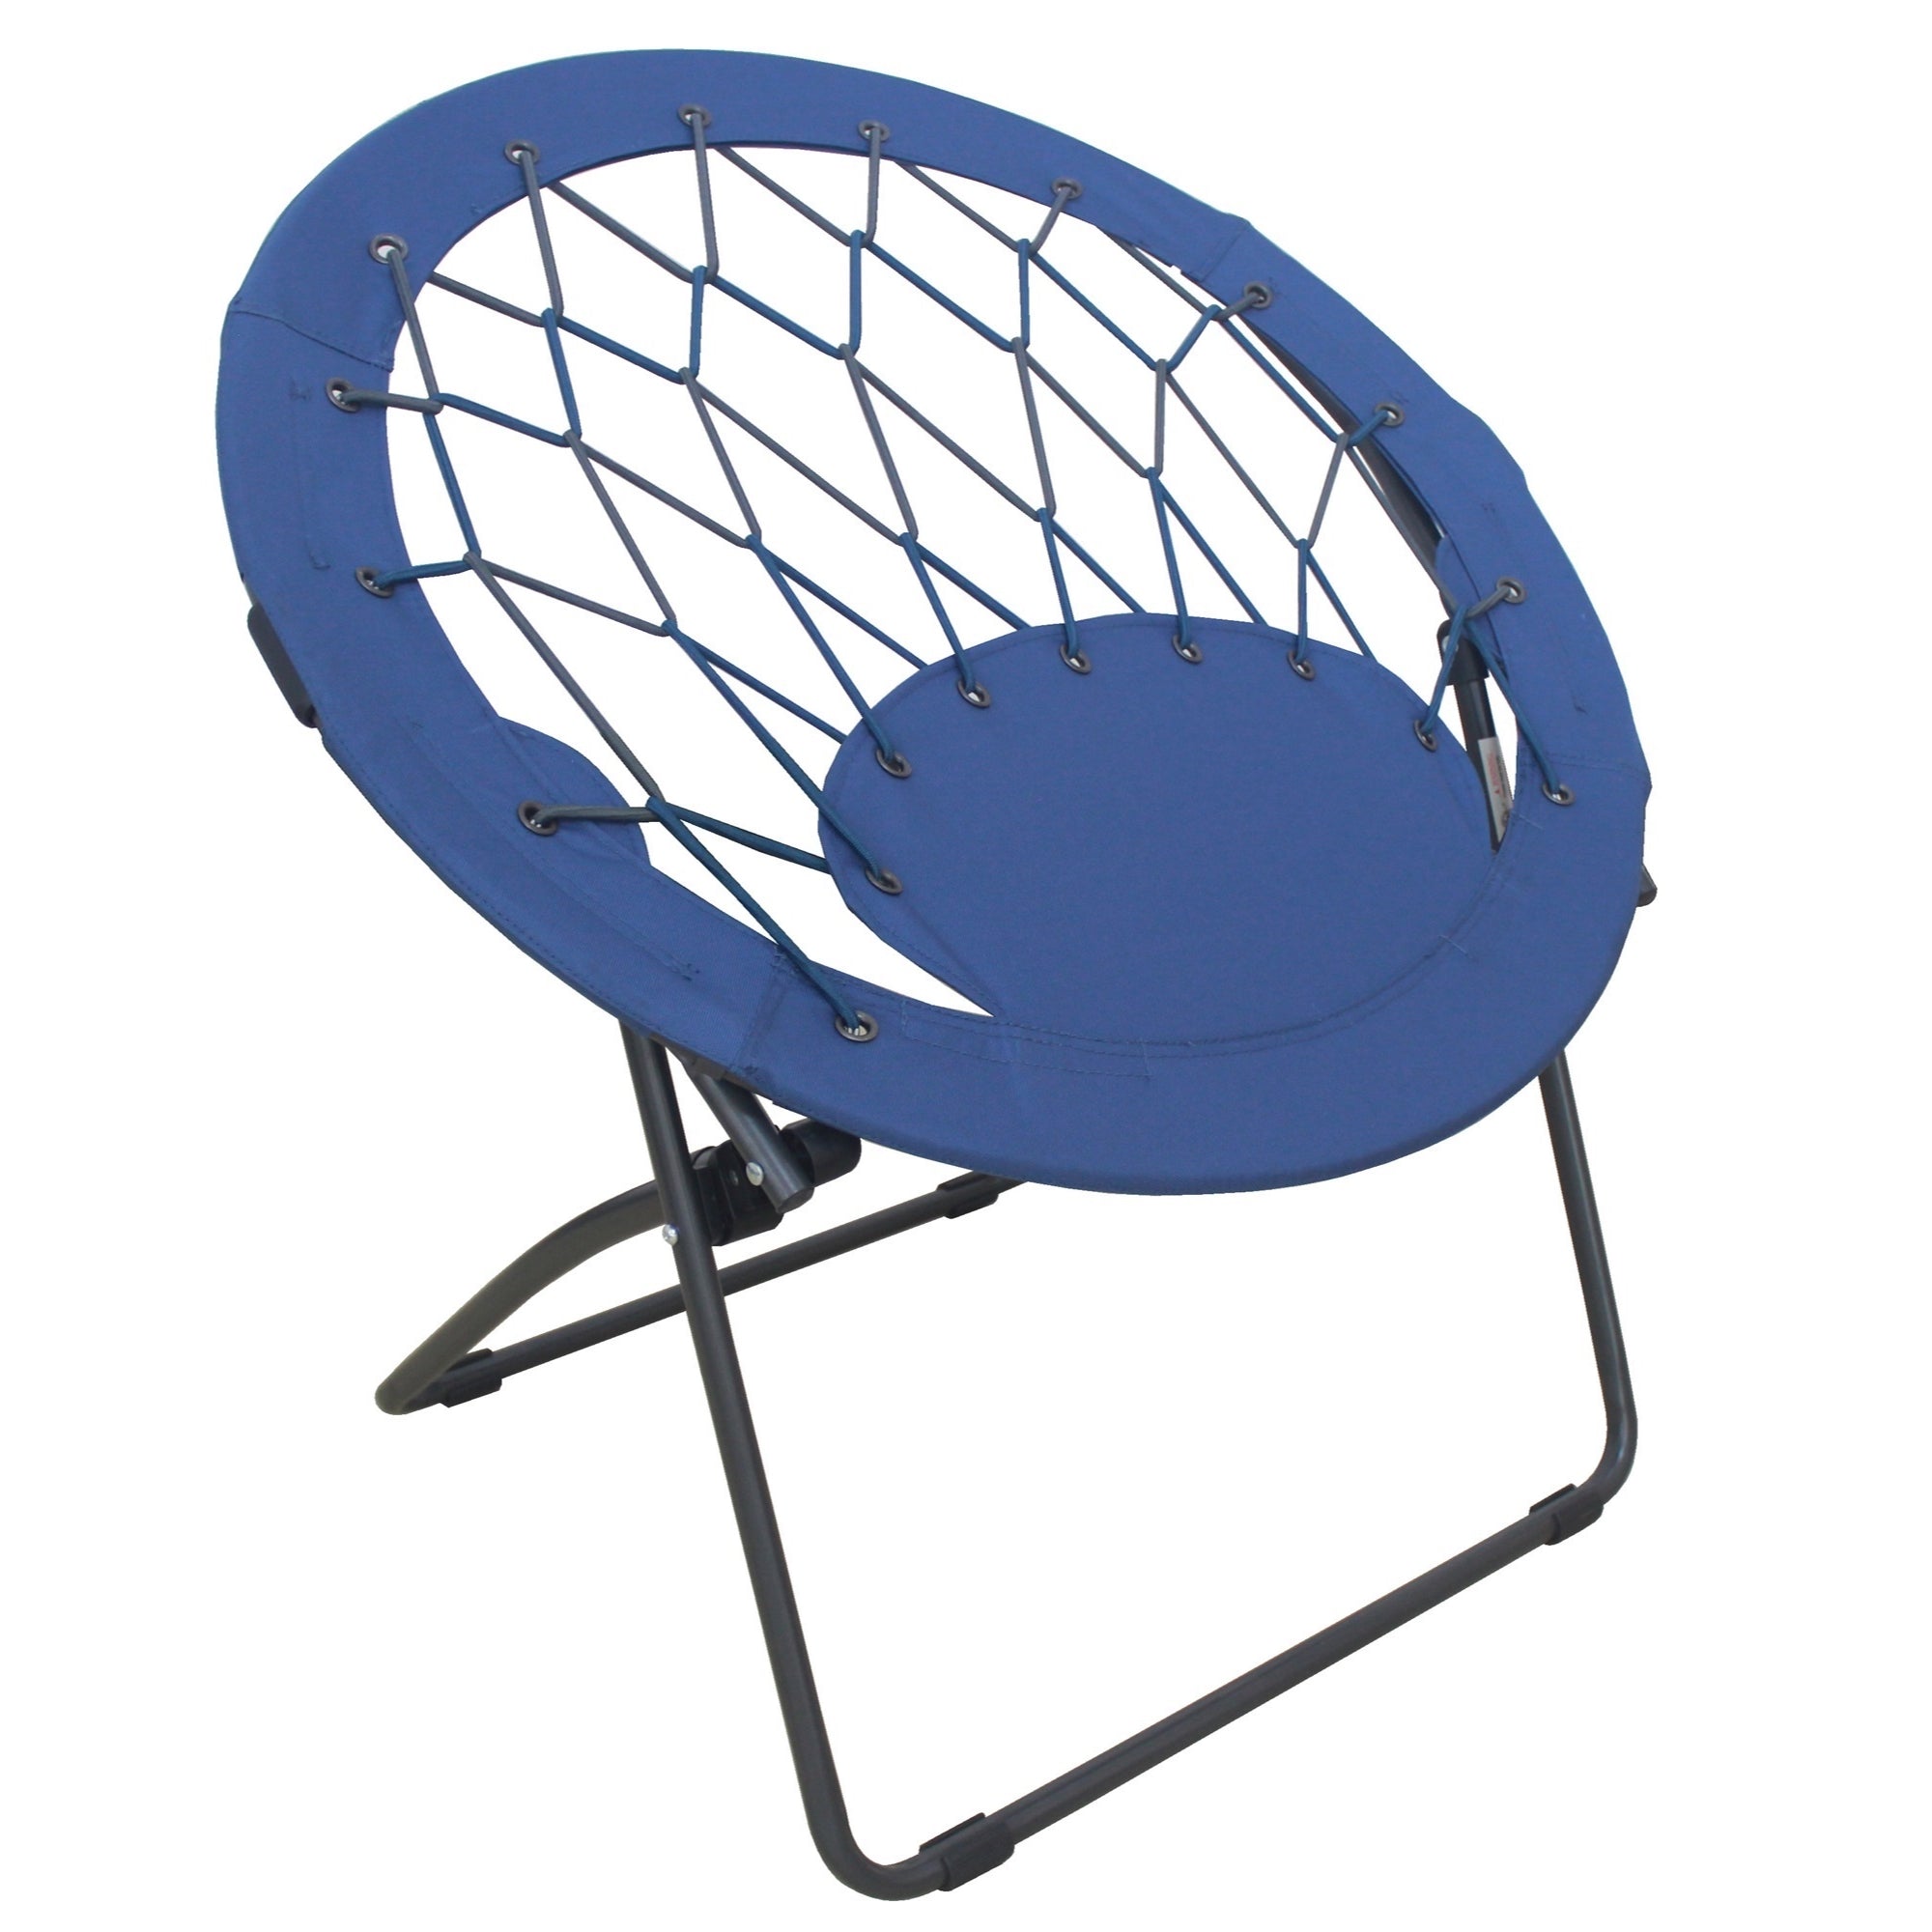 Zenithen Bungee Folding Bouncy Dish/Saucer Chair with Steel Frame, Blue - Pack of 1